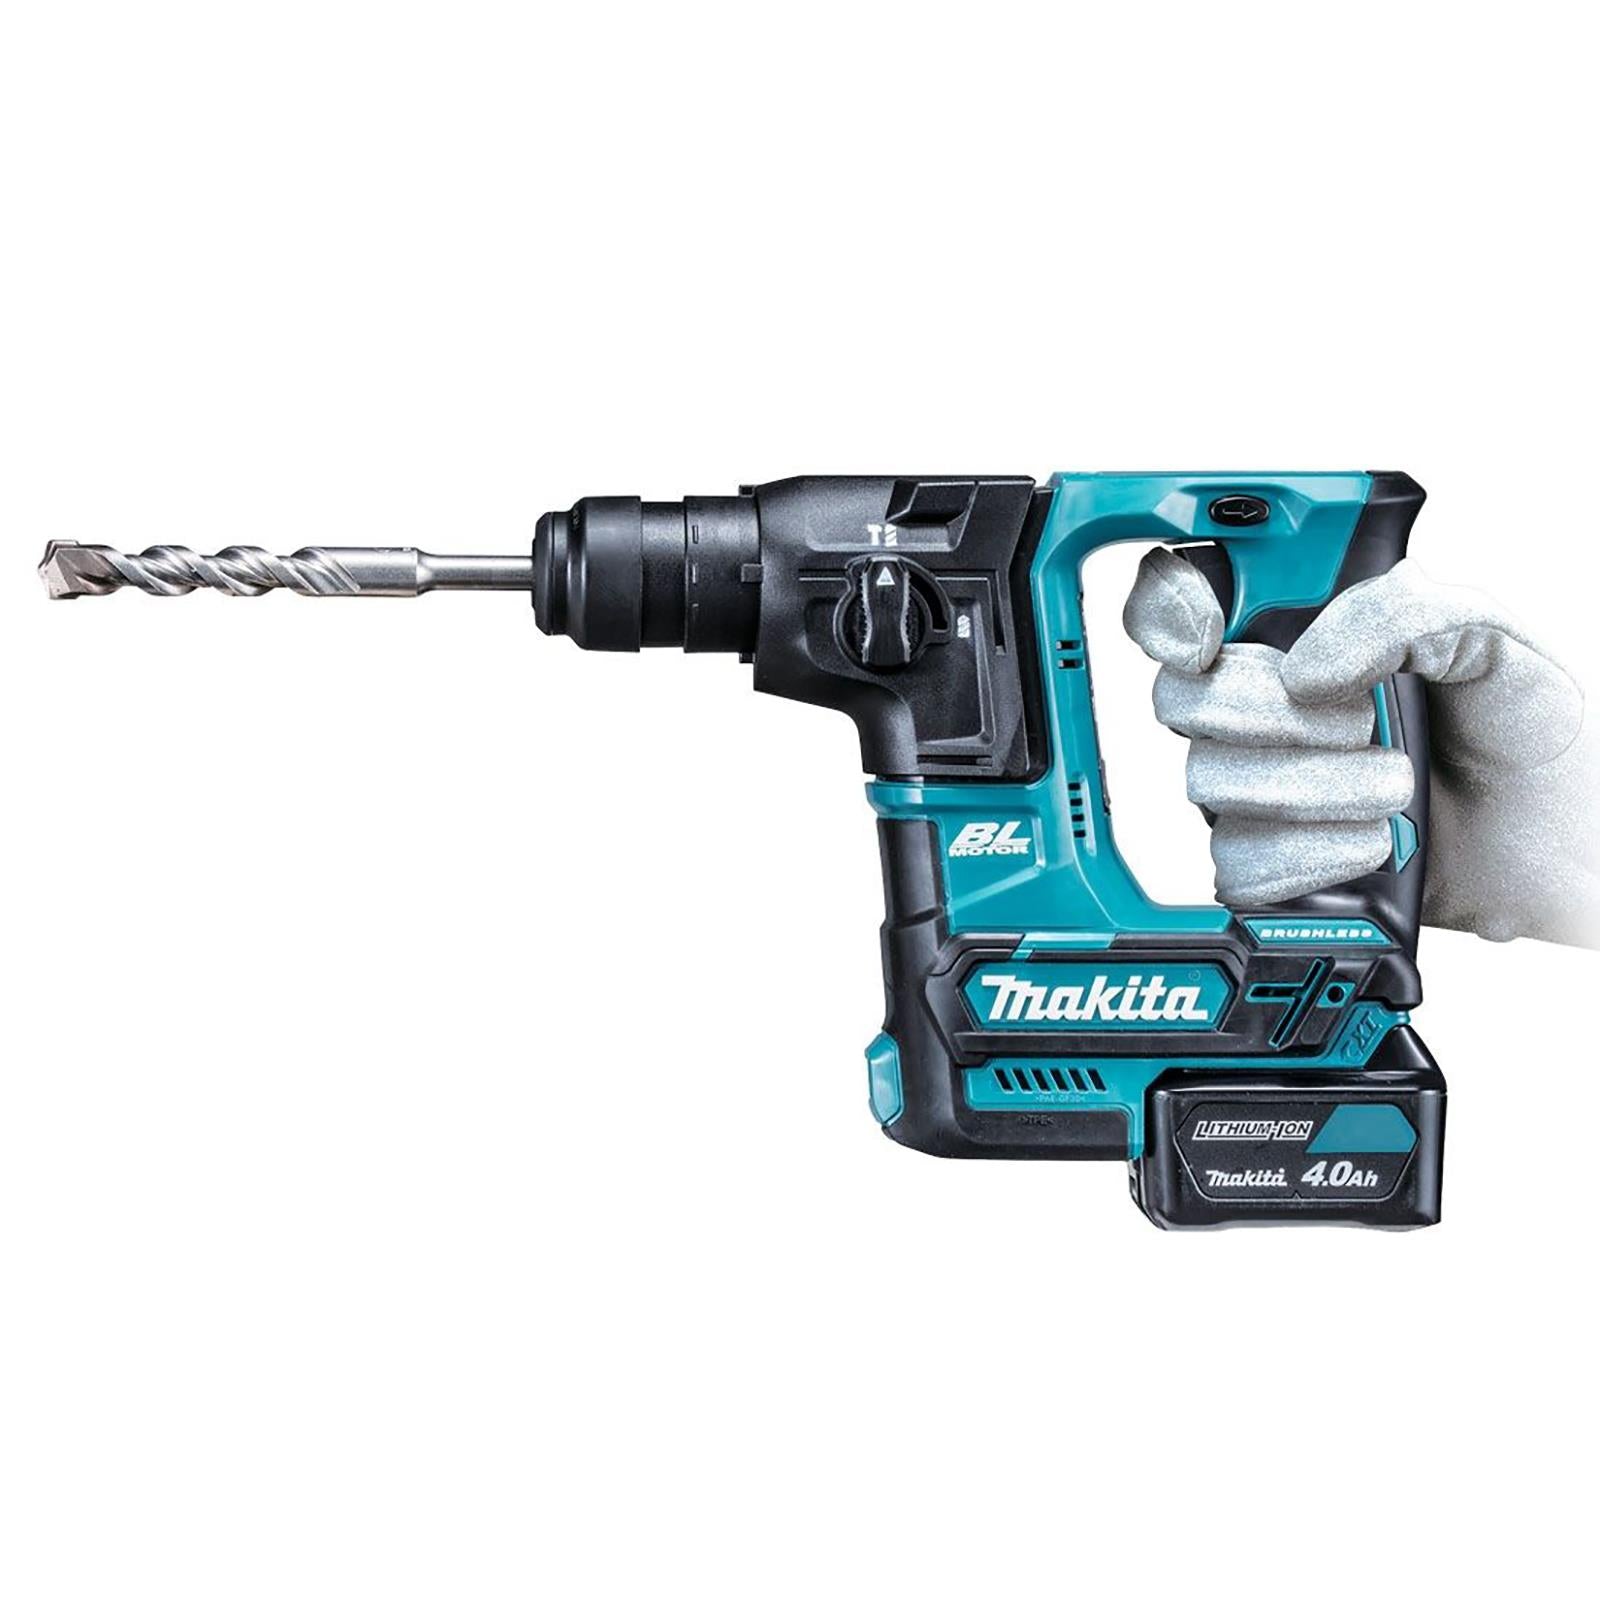 Makita Rotary Hammer Drill SDS+ Plus Compact Brushless CXT HR166DZ Body Only